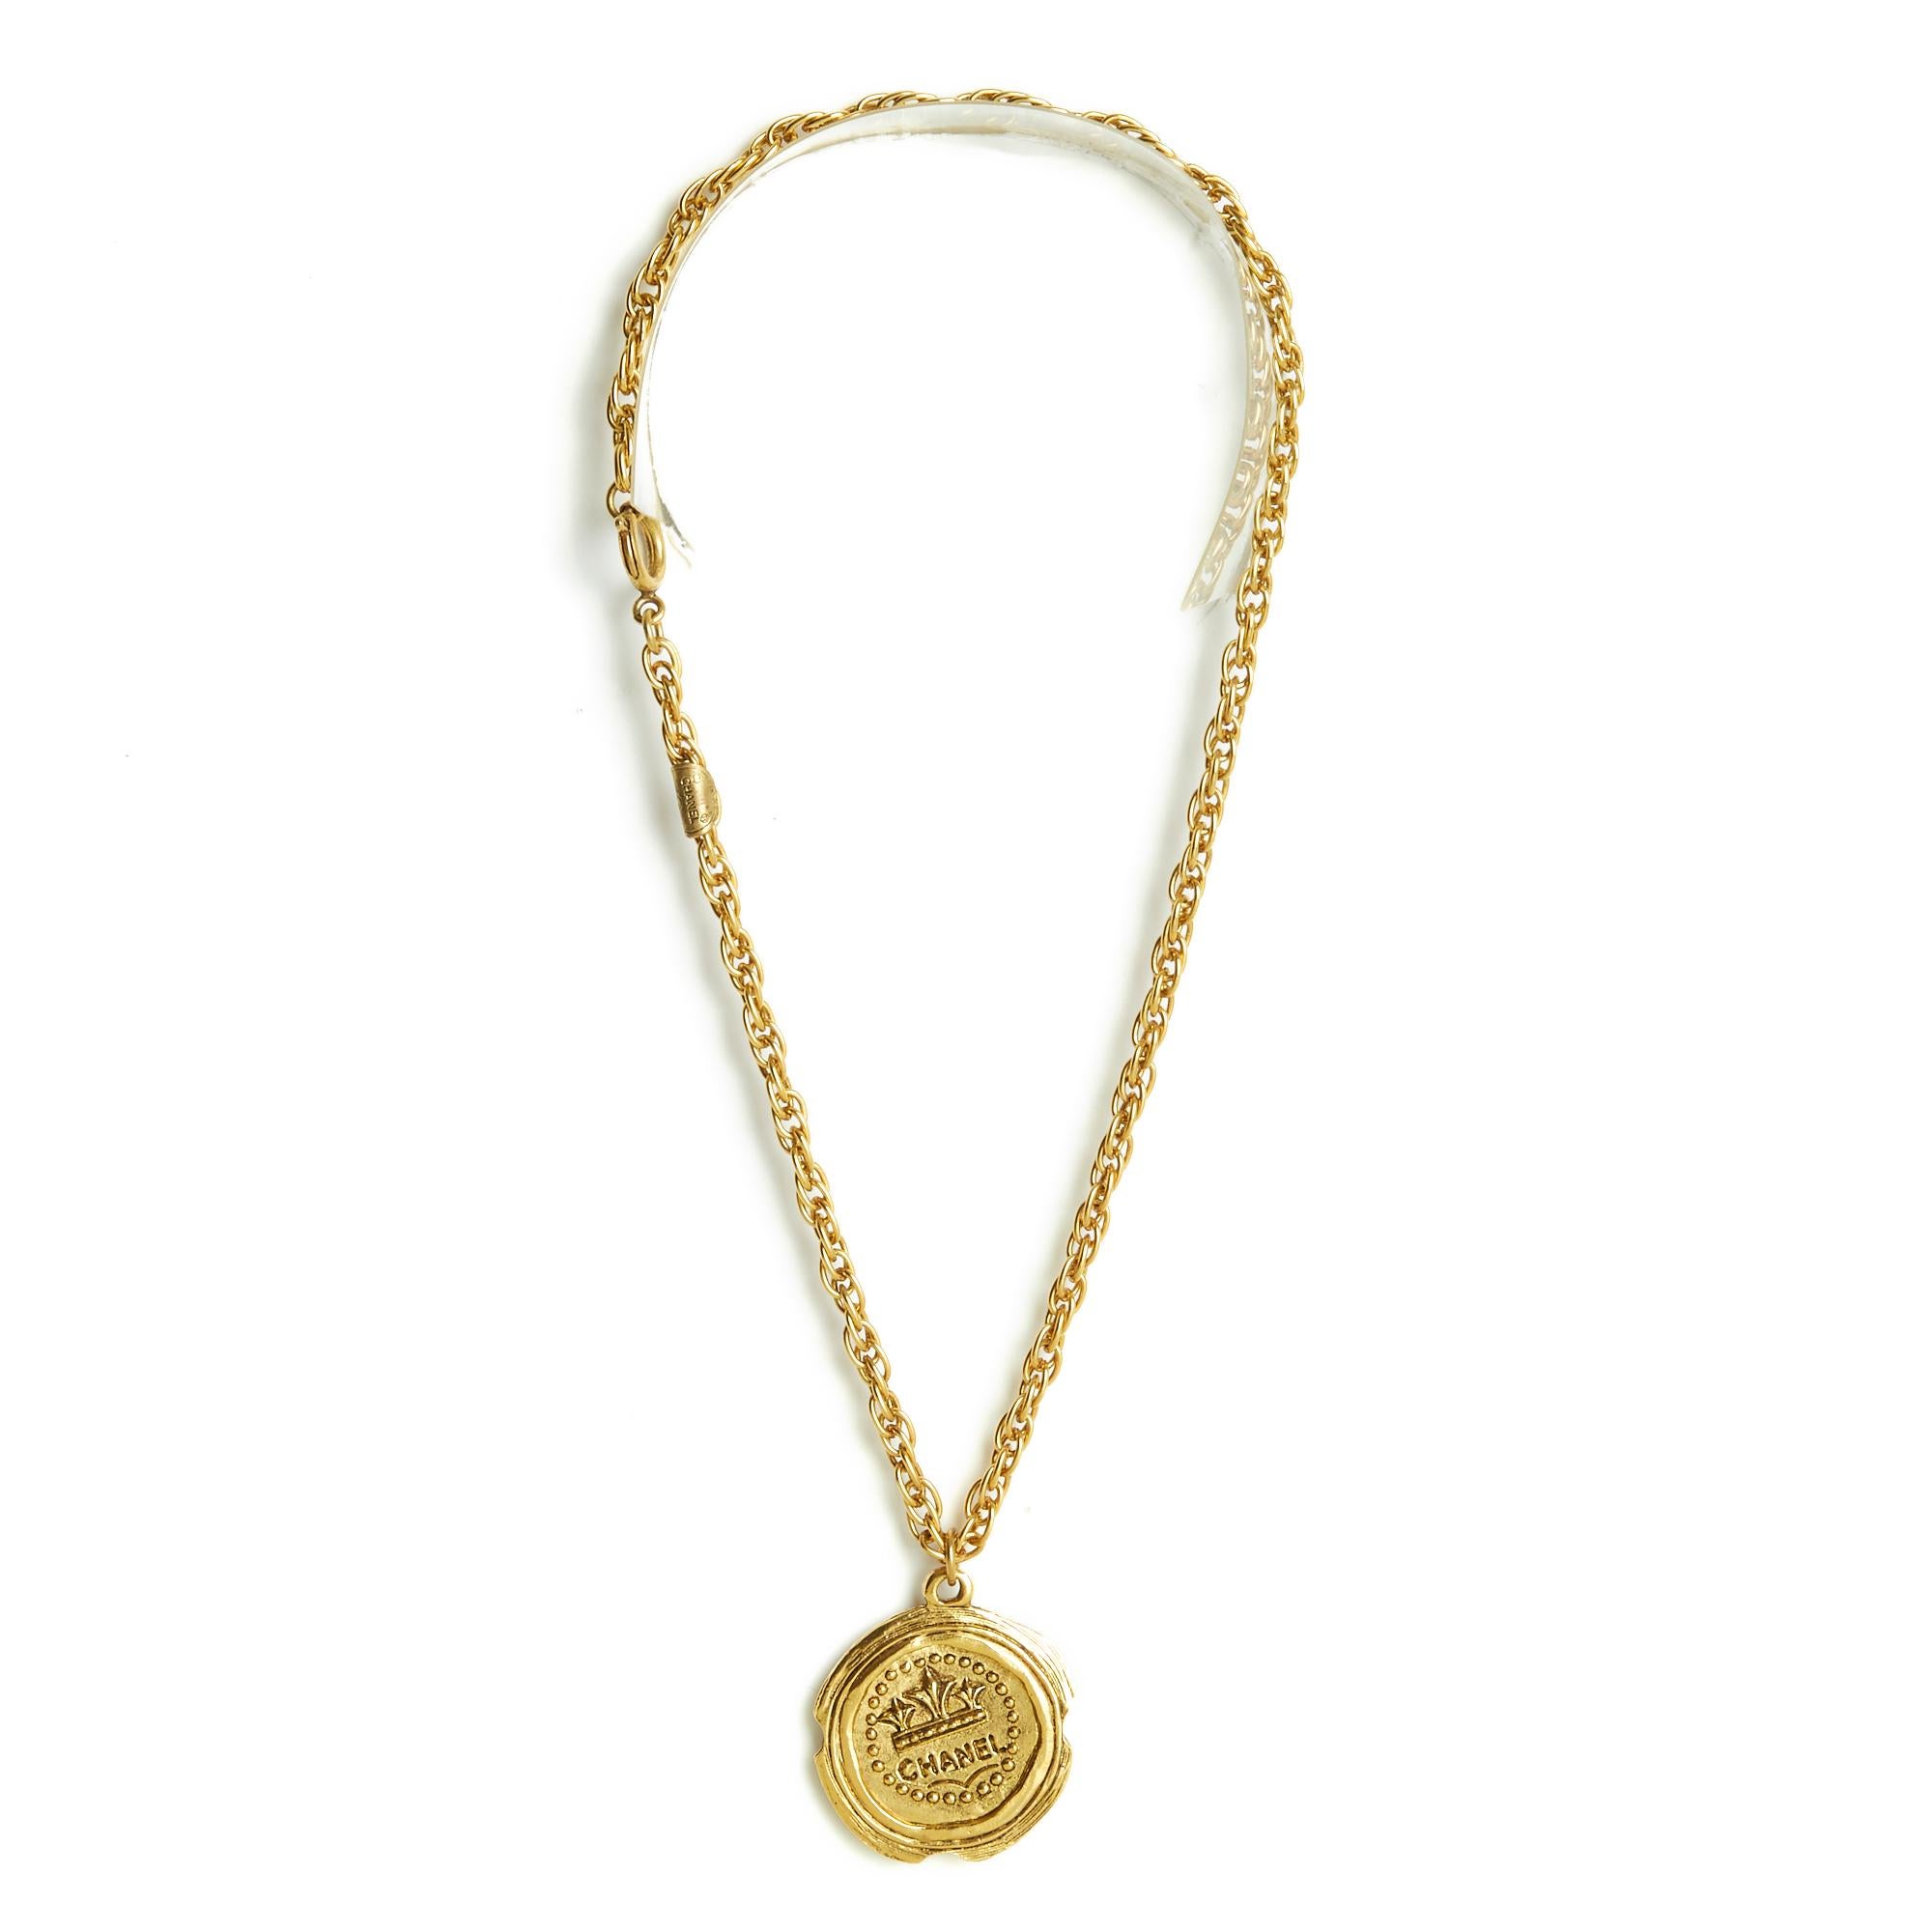 Chanel Haute Couture necklace in gold metal composed of a twisted mesh chain and a large medallion shaped with the motif of a 